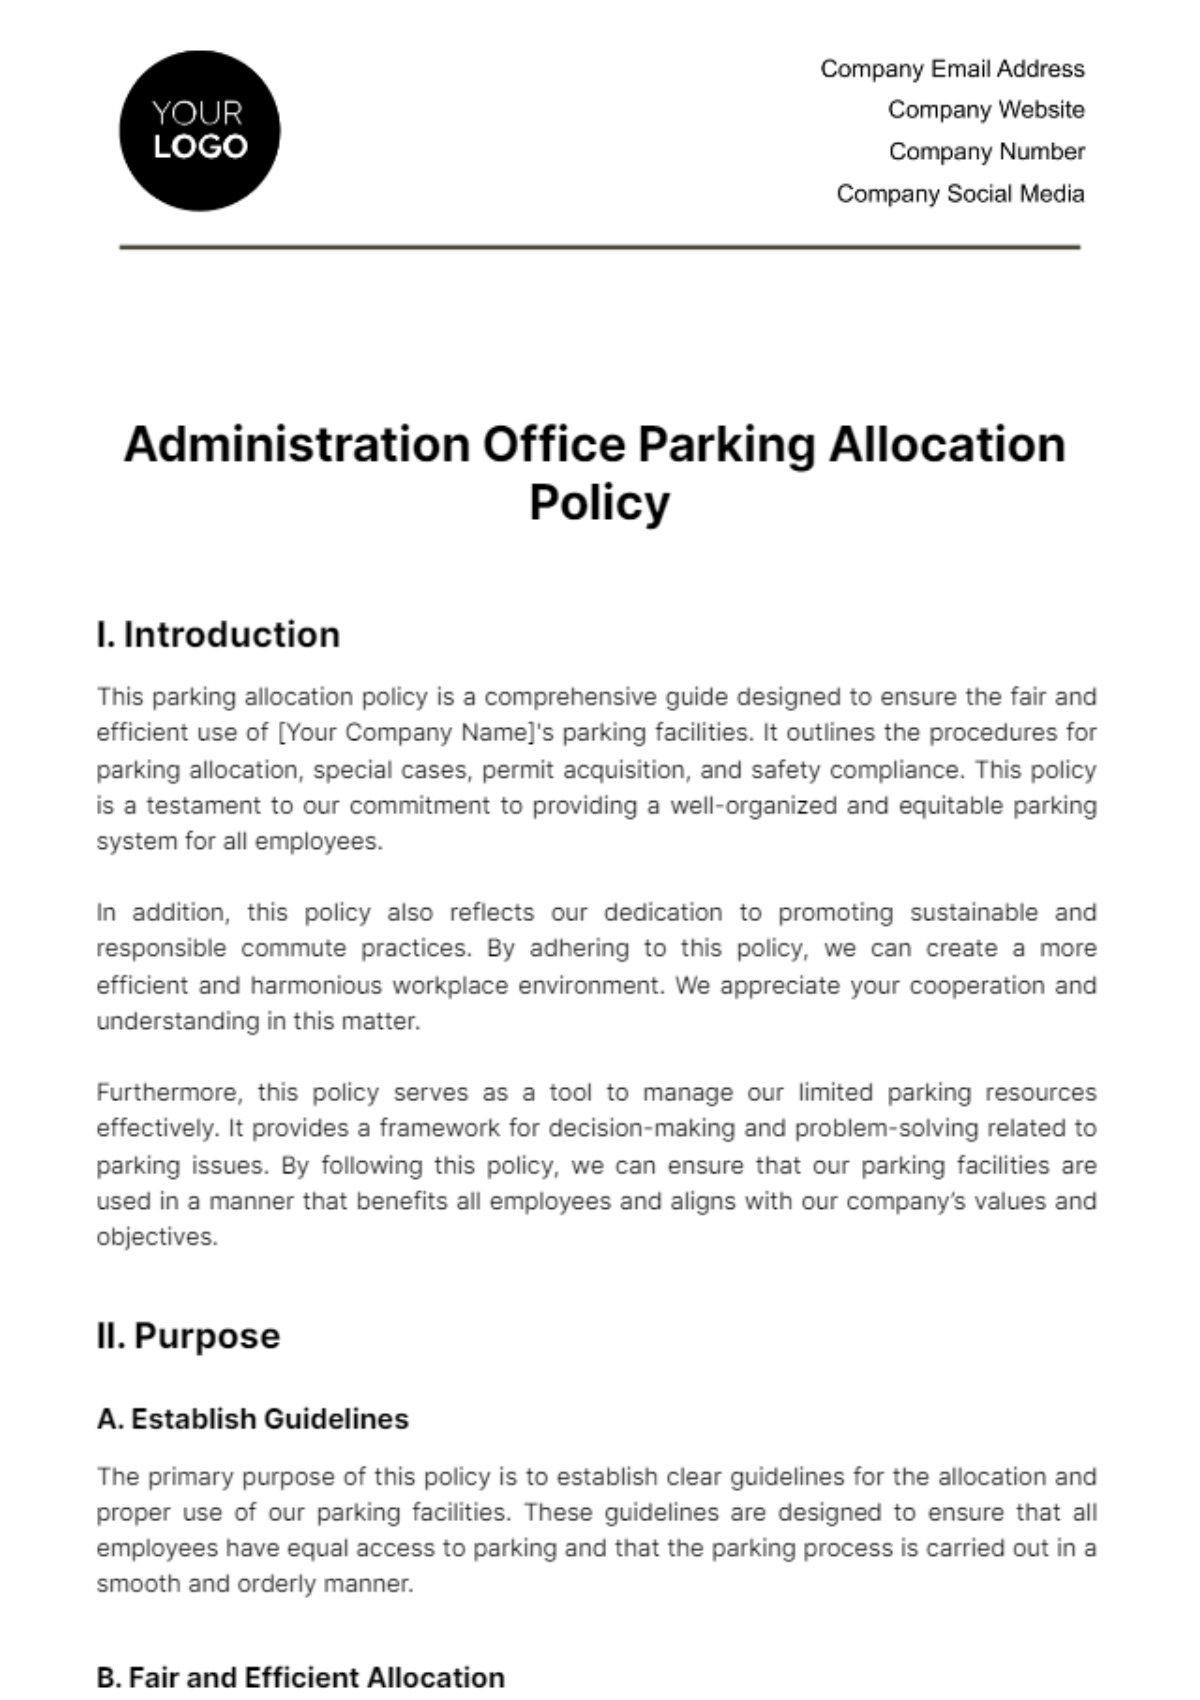 Administration Office Parking Allocation Policy Template